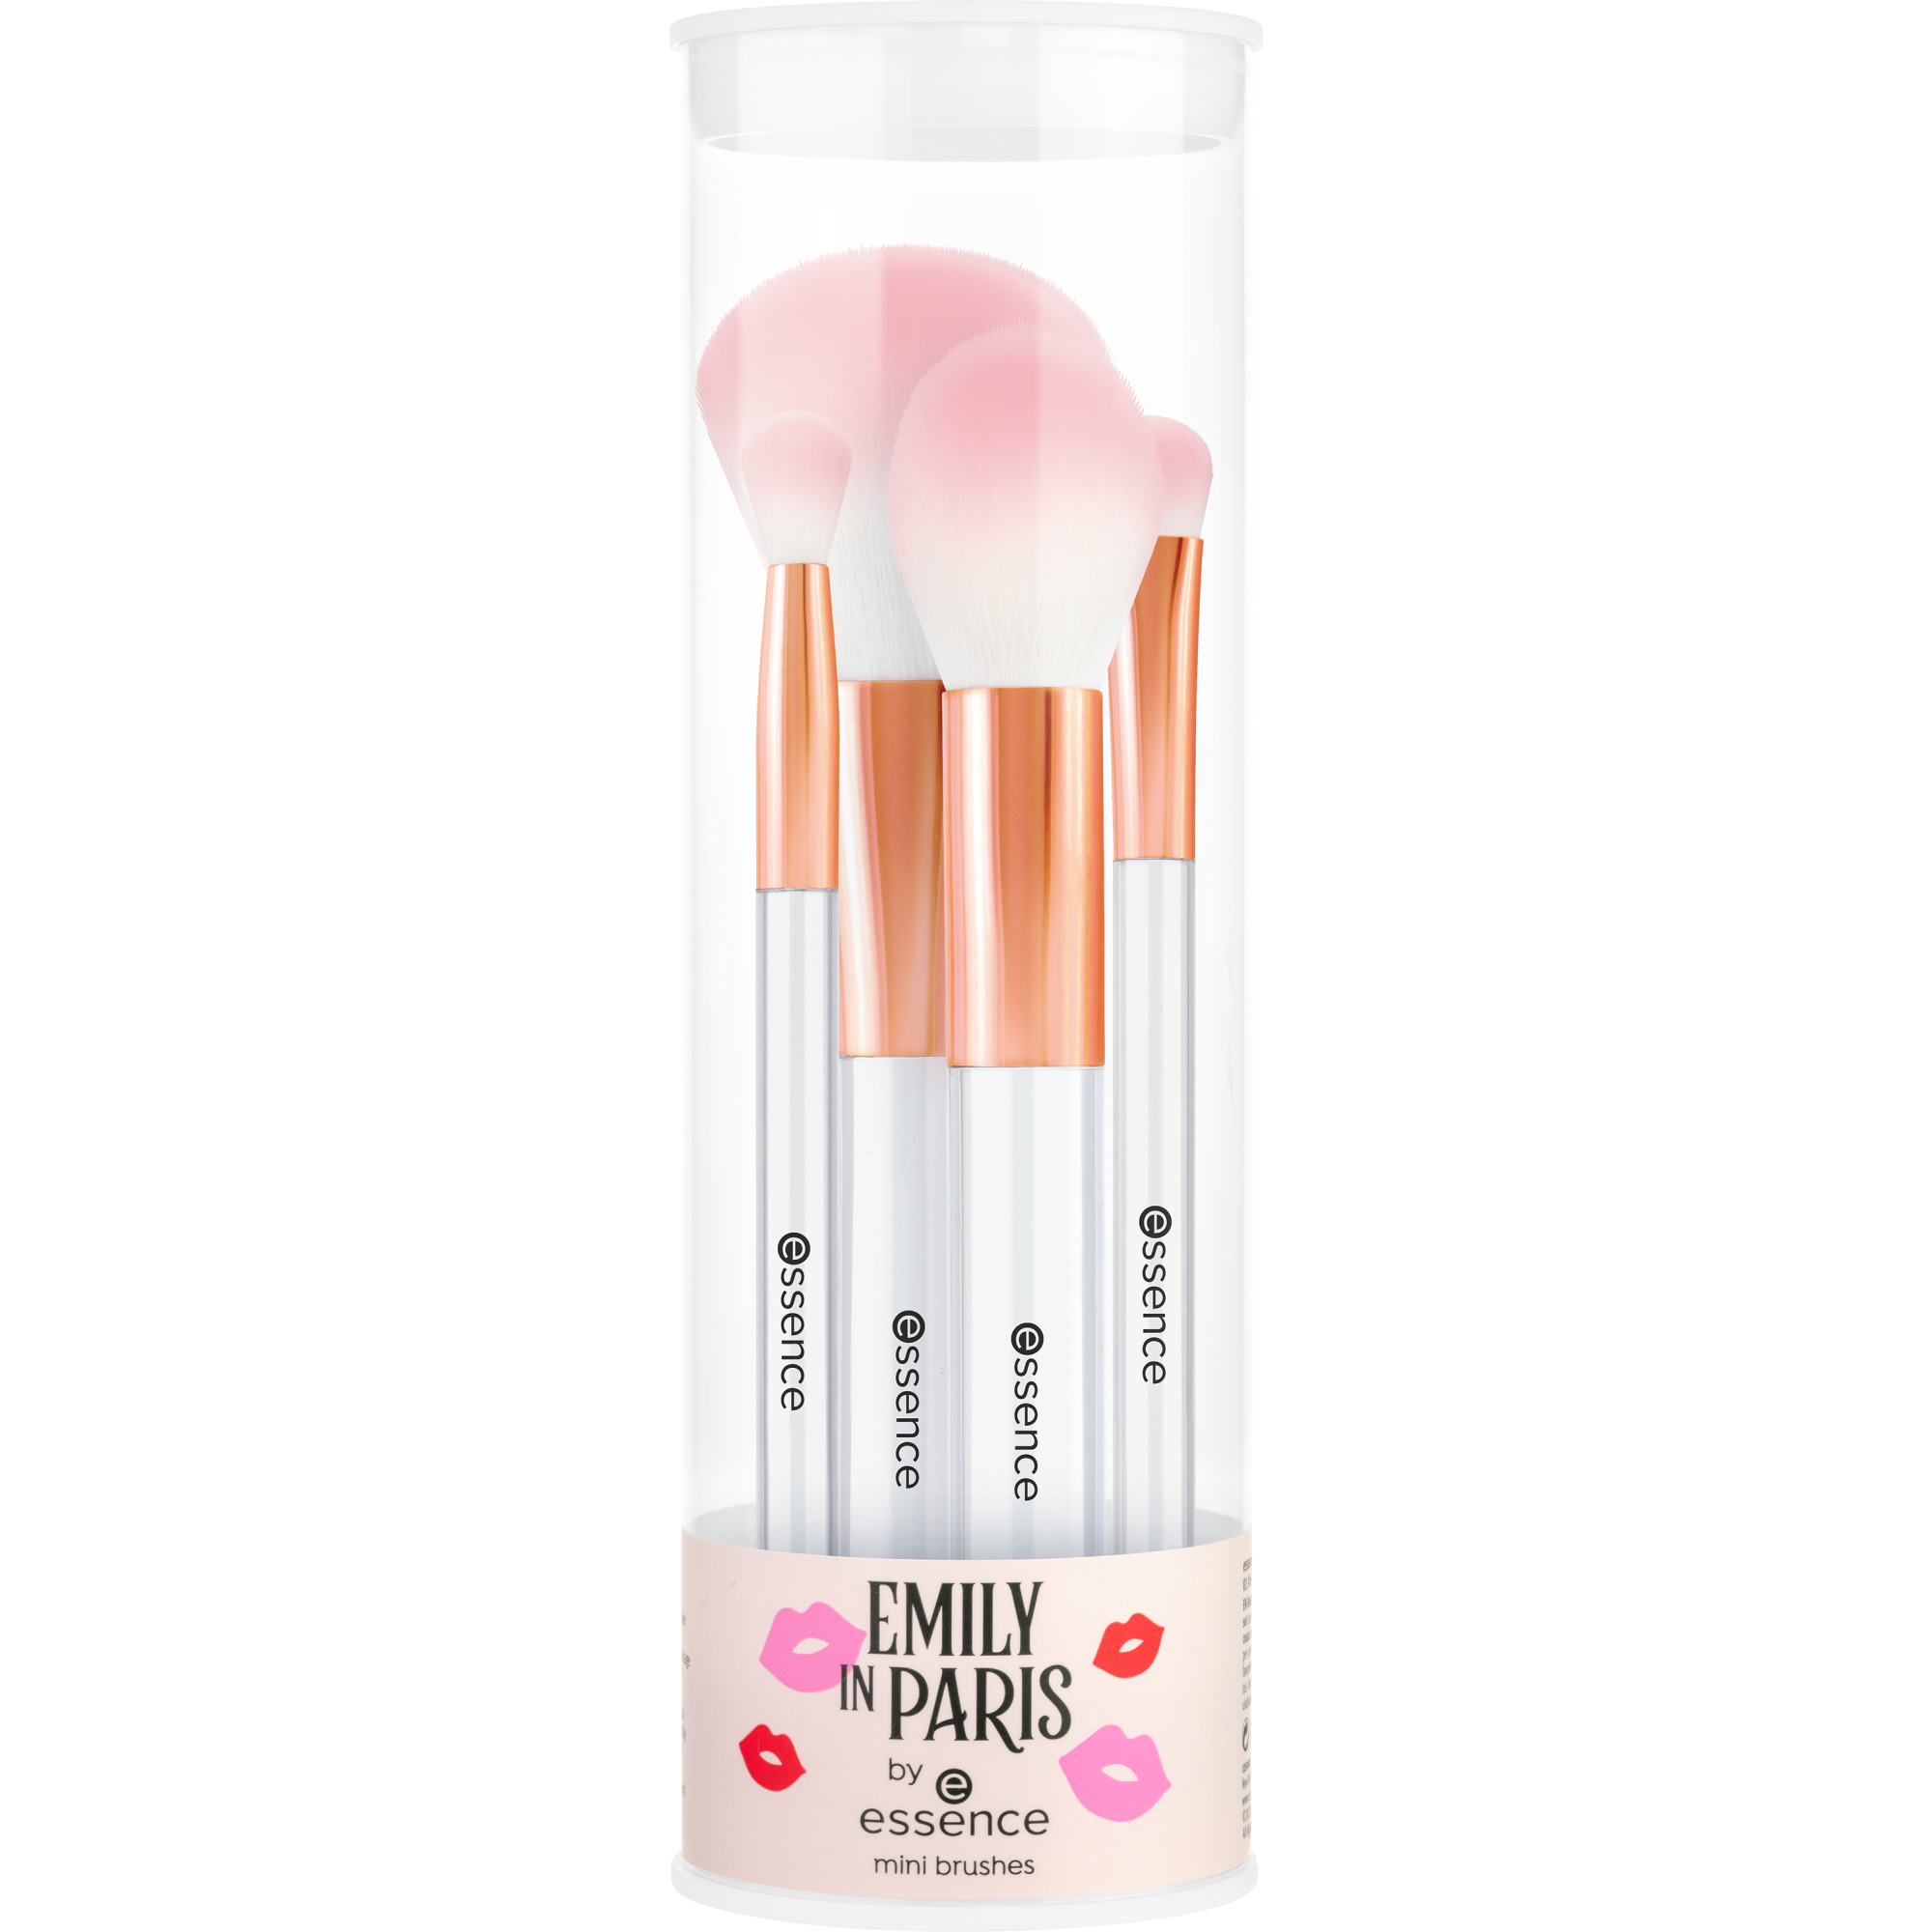 essence EMILY IN PARIS by essence mini brushes